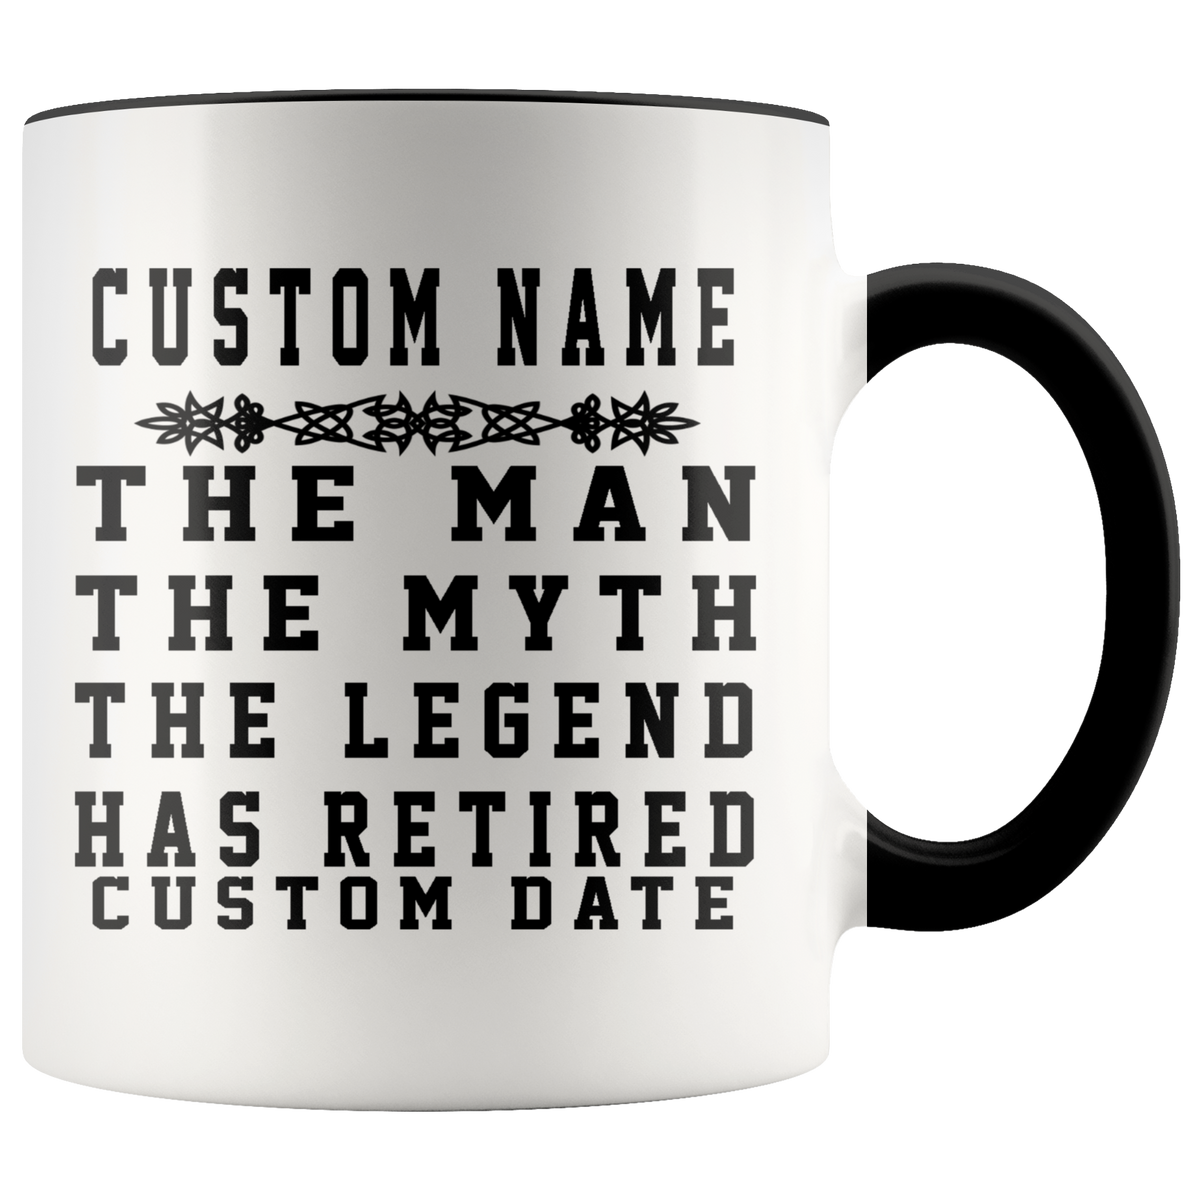 Personalized Retirement Mug Gift For Man - The Man The Myth The Legend Has Retired With Custom Name And Date